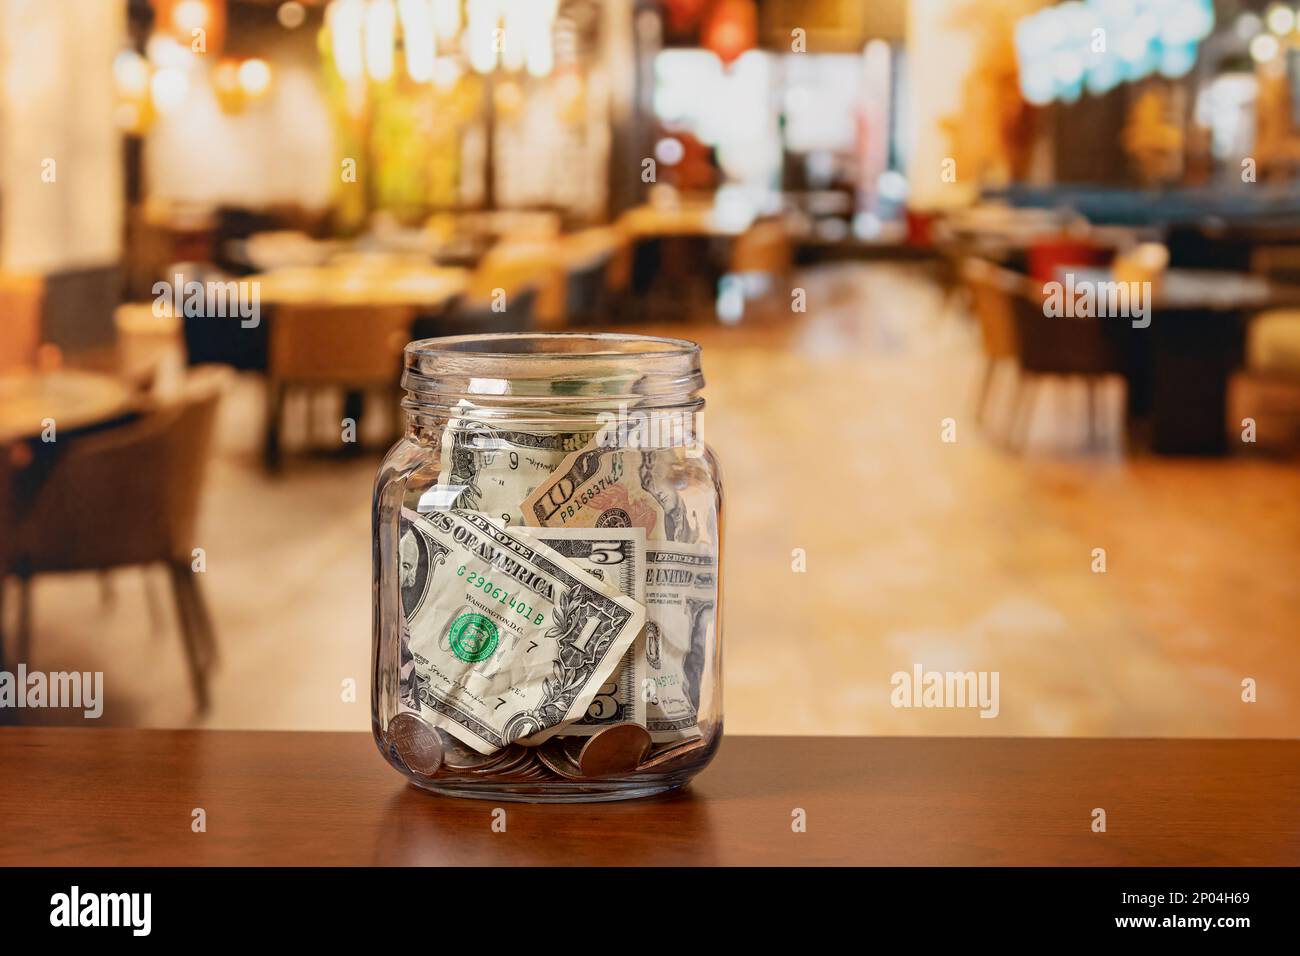 Tip jar in restaurant dining room. Service industry tipping, minimum wage and gratuity concept. Stock Photo